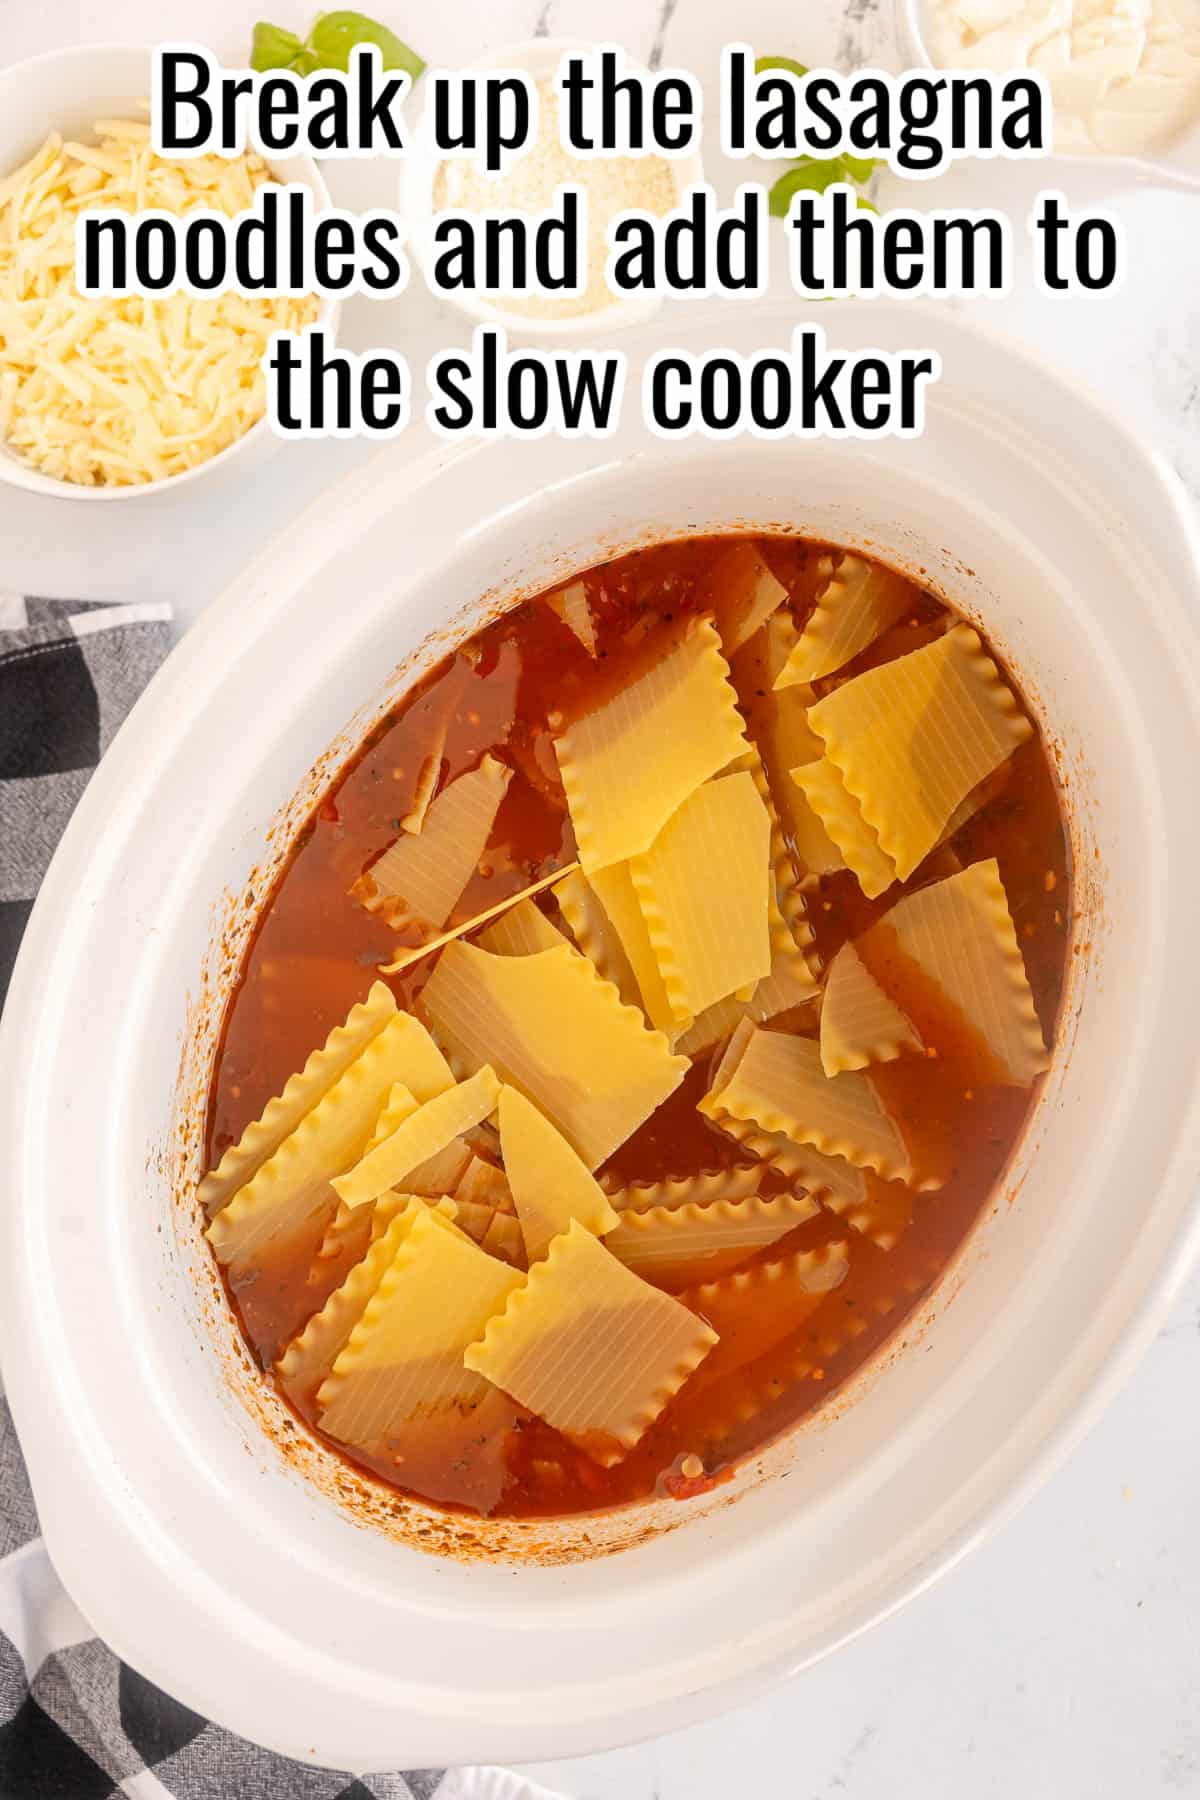 a slow cooker with uncooked lasagna noodles in it.